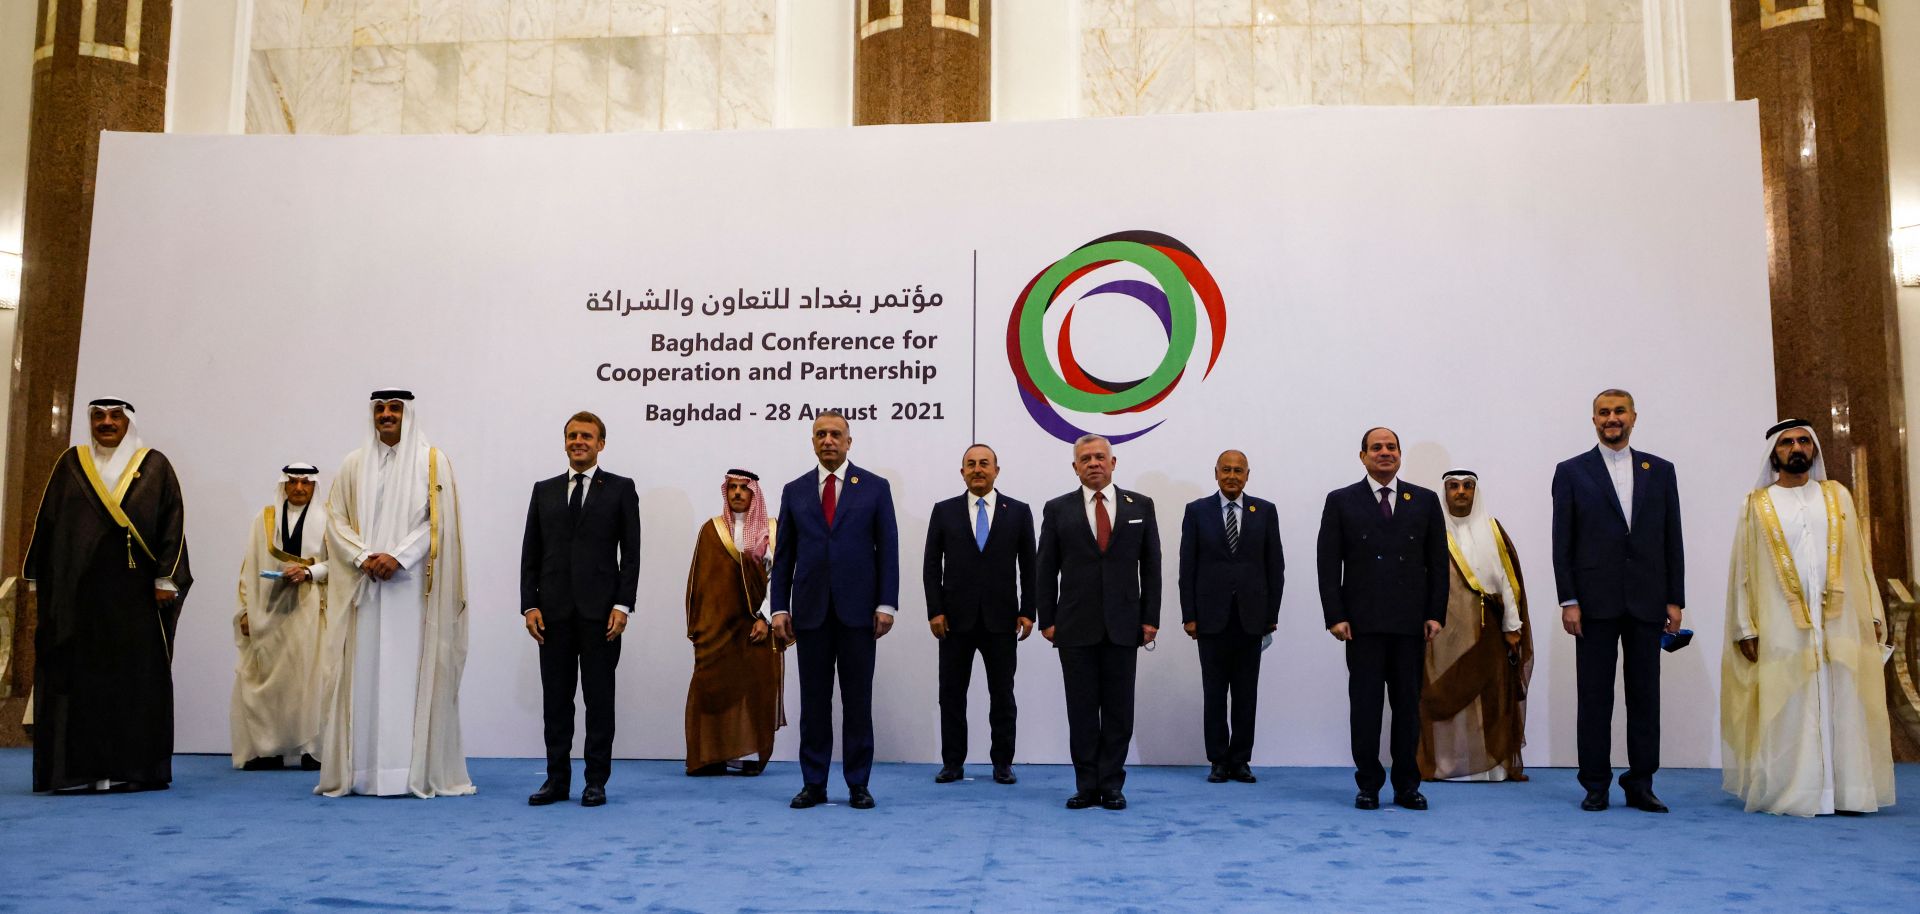 Officials from Kuwait, Qatar, France, Saudi Arabia, Iraq, Turkey, Jordan, Egypt, Iran and the United Arab Emirates, along with representatives from the Organization of Islamic Cooperation (OIC), Arab League and Gulf Cooperation Council (GCC) pose for a group photo after the meeting in Baghdad on Aug. 28, 2021. 